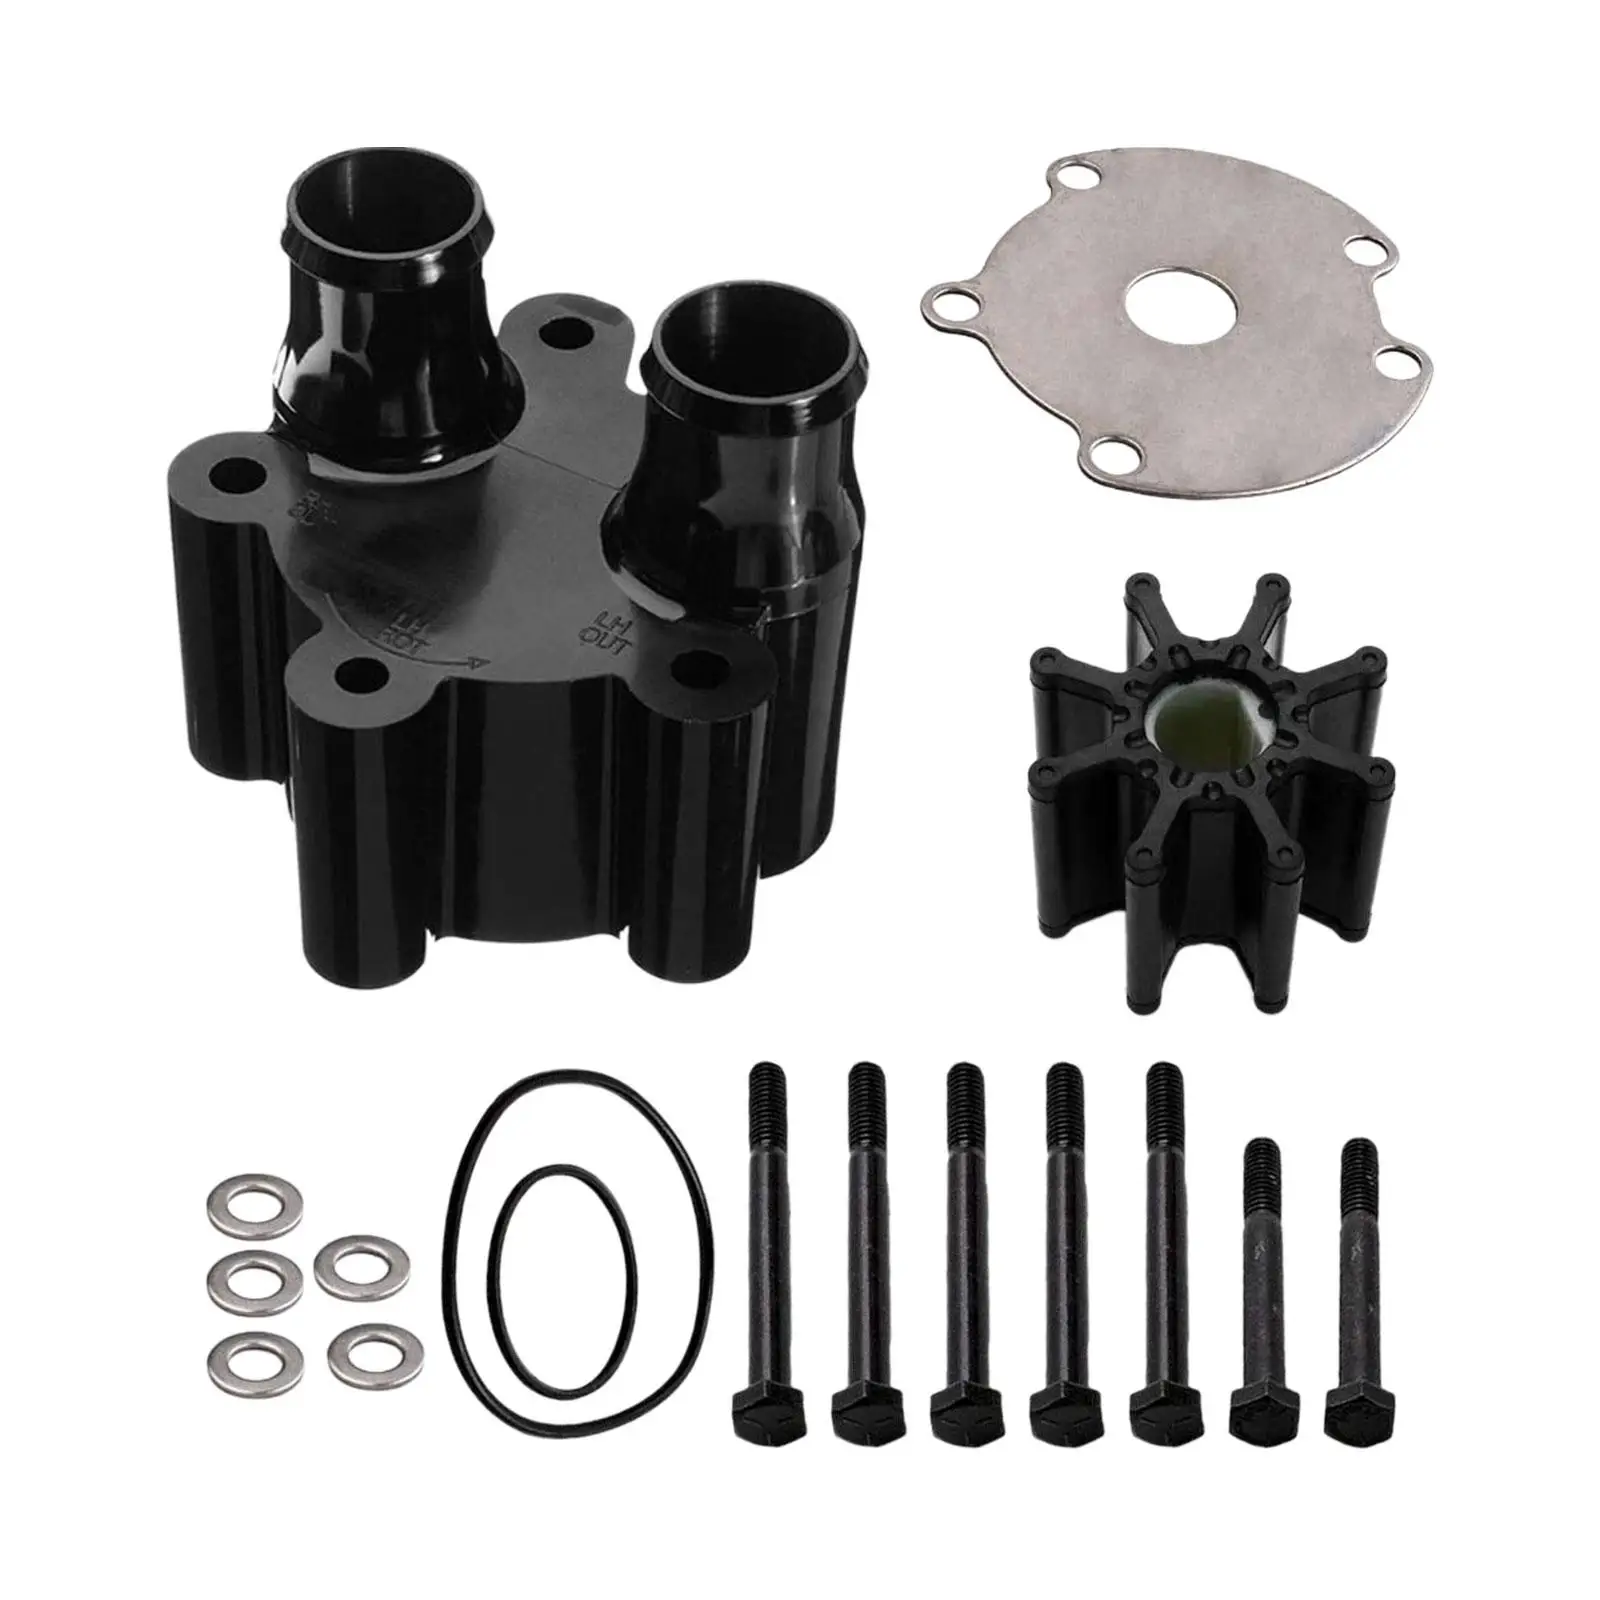 Water Pump Impeller Kit with Housing 46-807151A14 for Mercruiser Bravo Engines